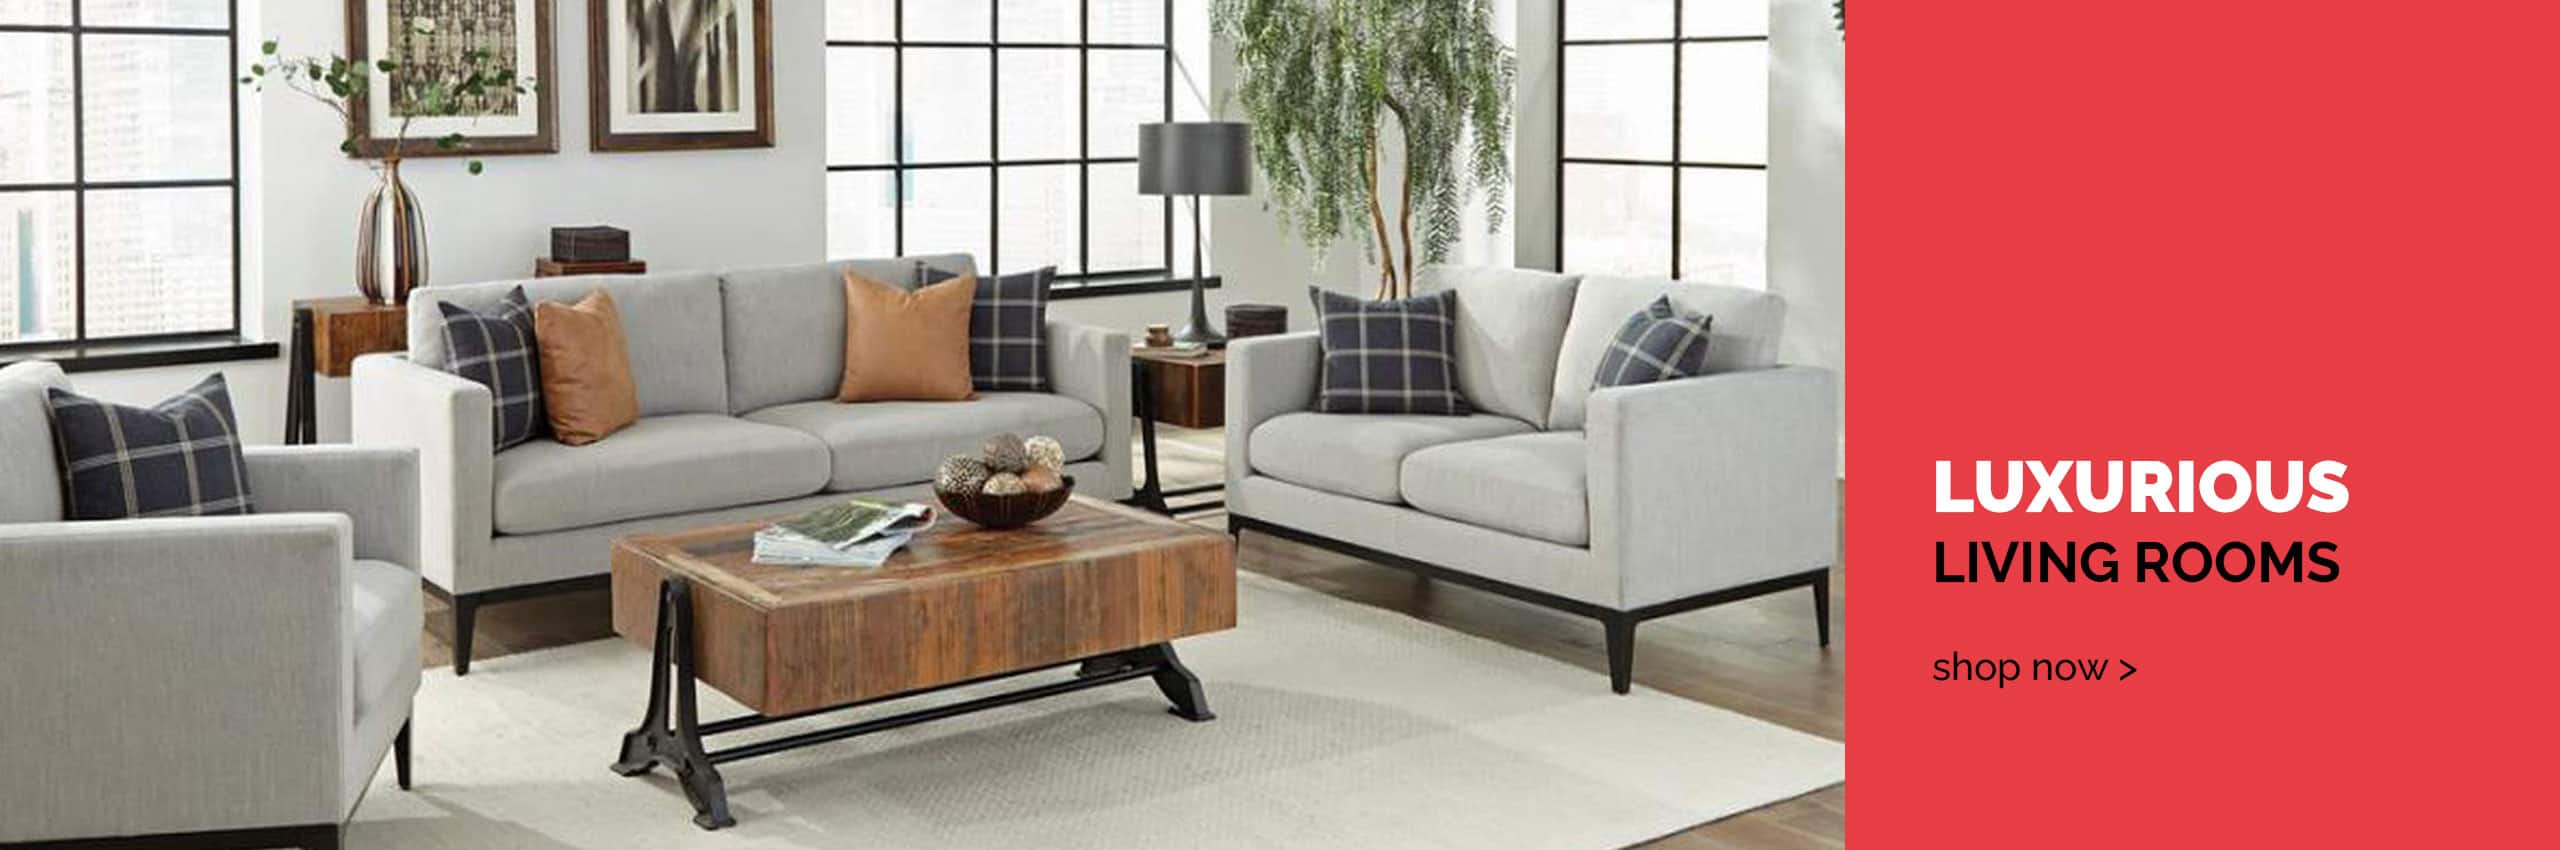 Luxurious Living Rooms – Shop now